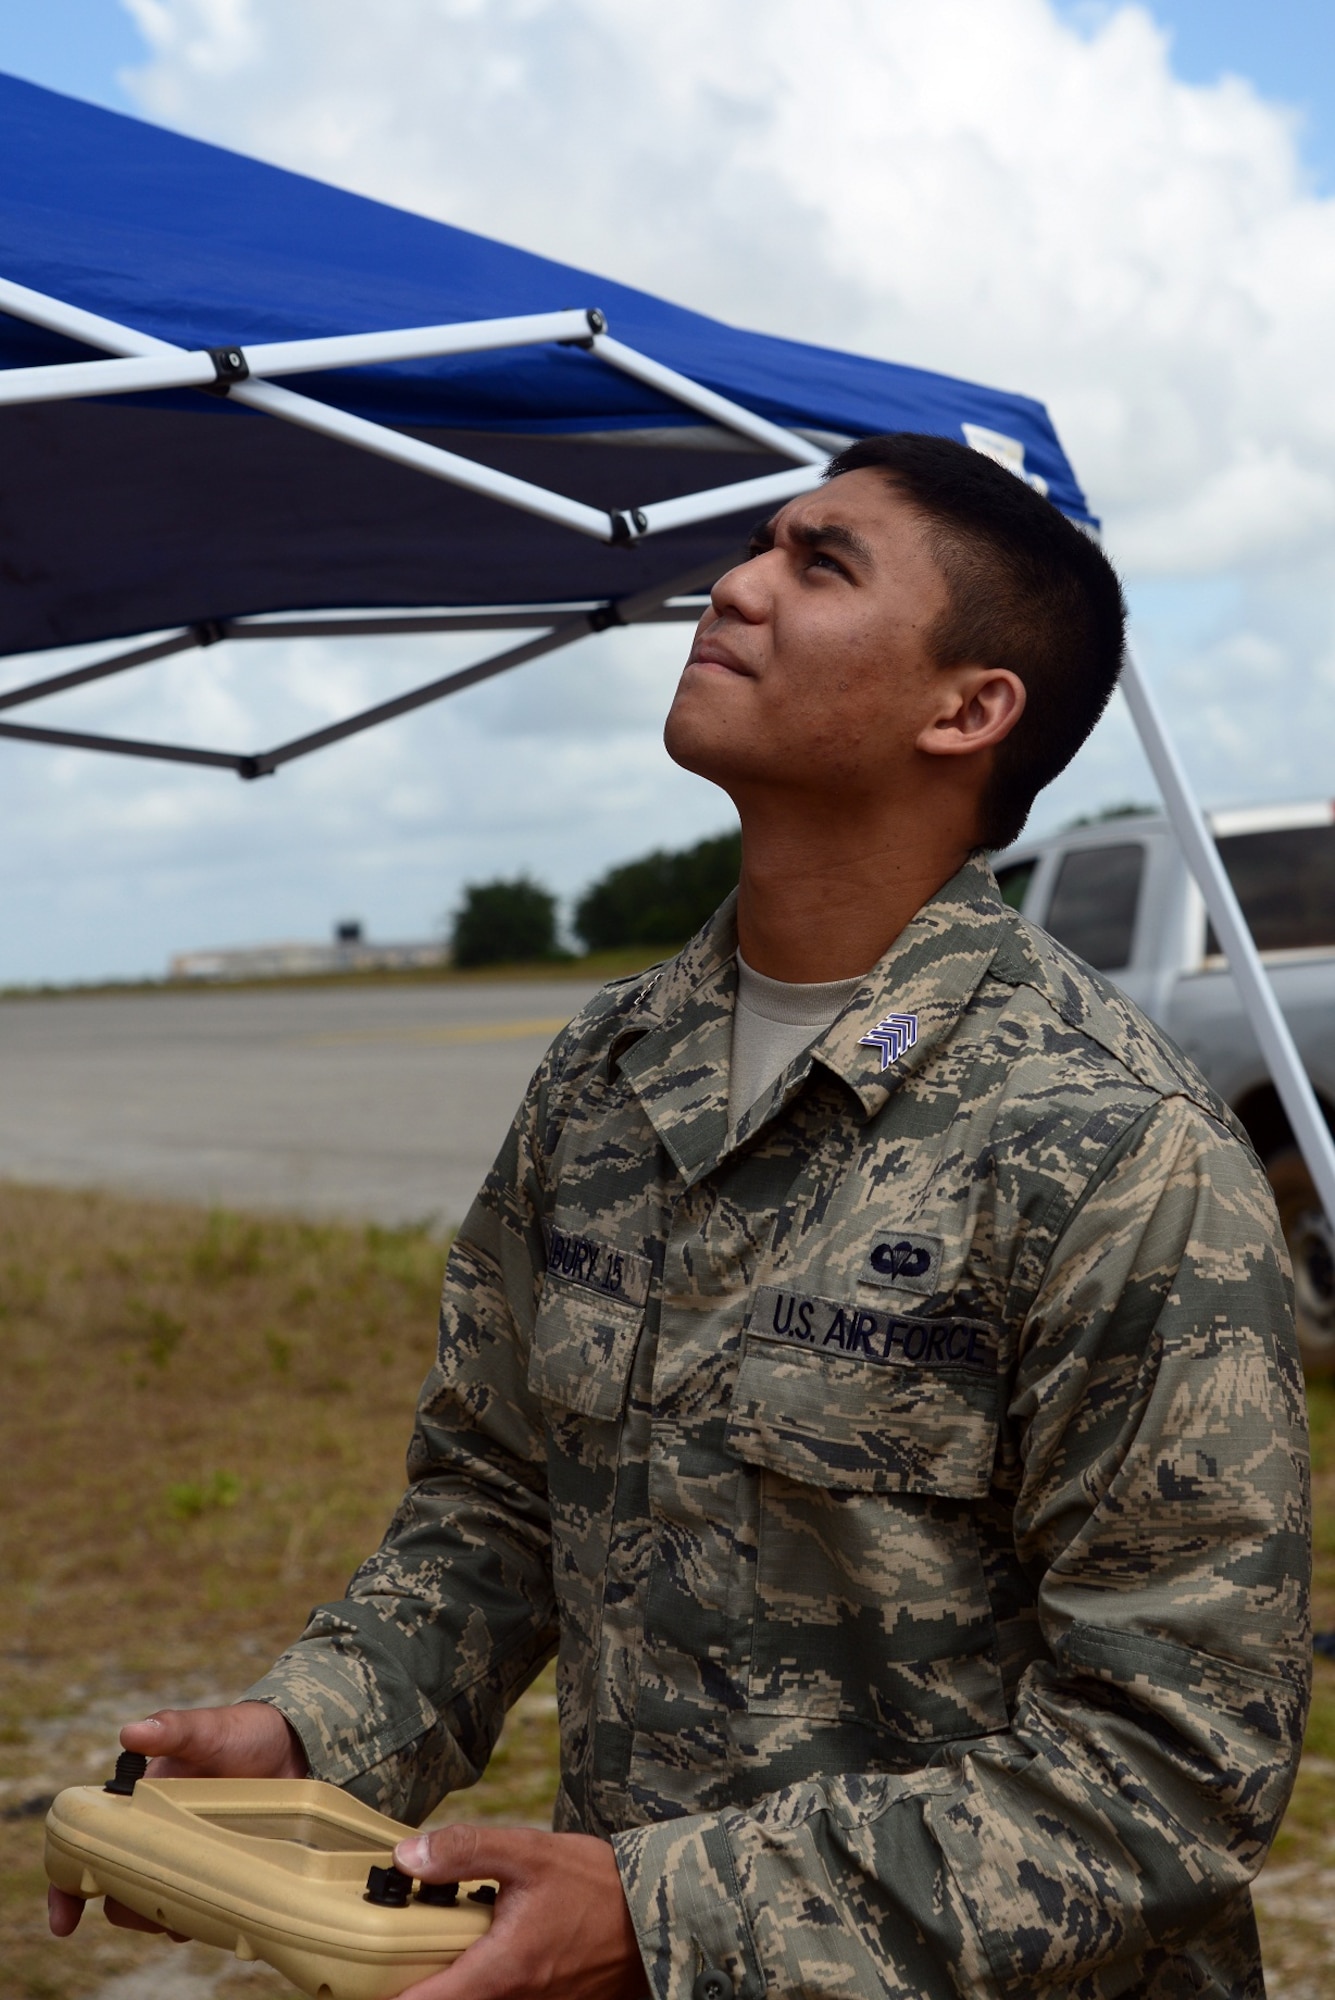 U.S. Air Force Academy Cadet 2nd Class Jacob Seabury controls an RQ-11B Raven Small Unmanned Aircraft System June 5, 2013 at Choctaw Airfield, Fla. The Raven can provide color and infrared video directly to the control station. (U.S. Air Force photo by Staff Sgt. Melanie Holochwost)